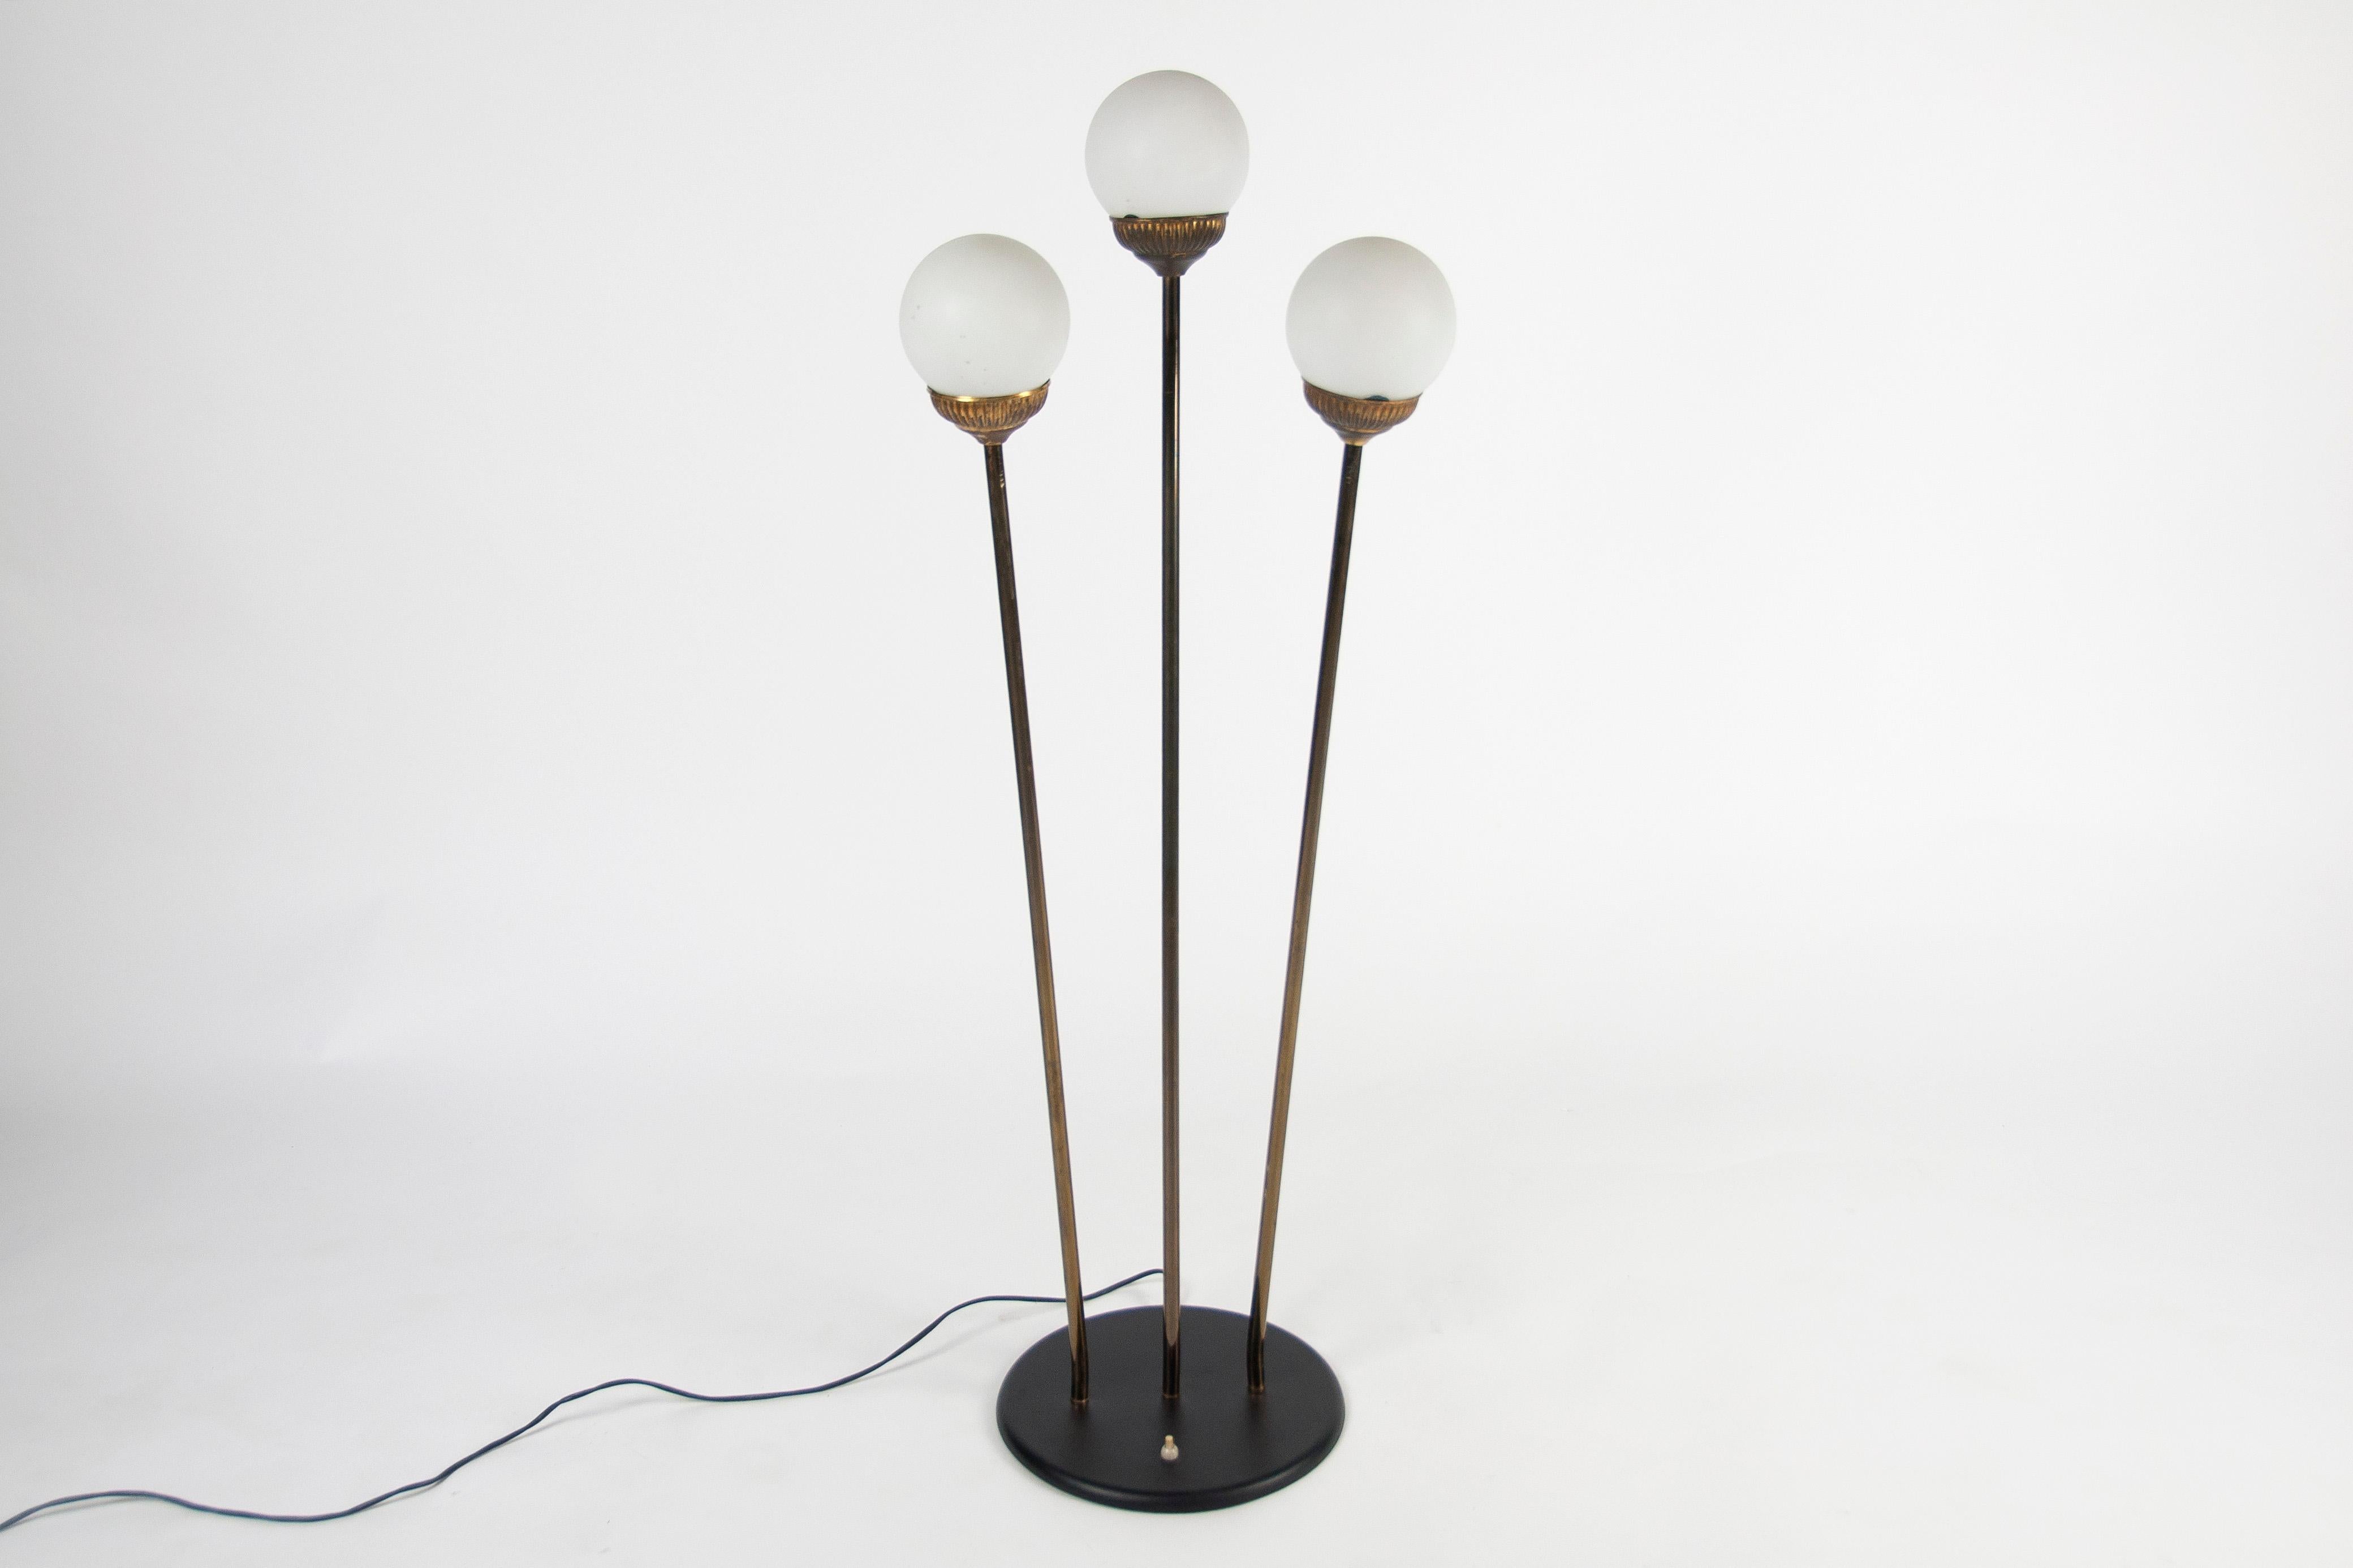 Beautiful Italian floor lamp from the 50s, original model attributed to stilnovo. The arms are adjustable in different directions and the globes are made of opaline glass. The three lamps can be switched on or off independently for more or less